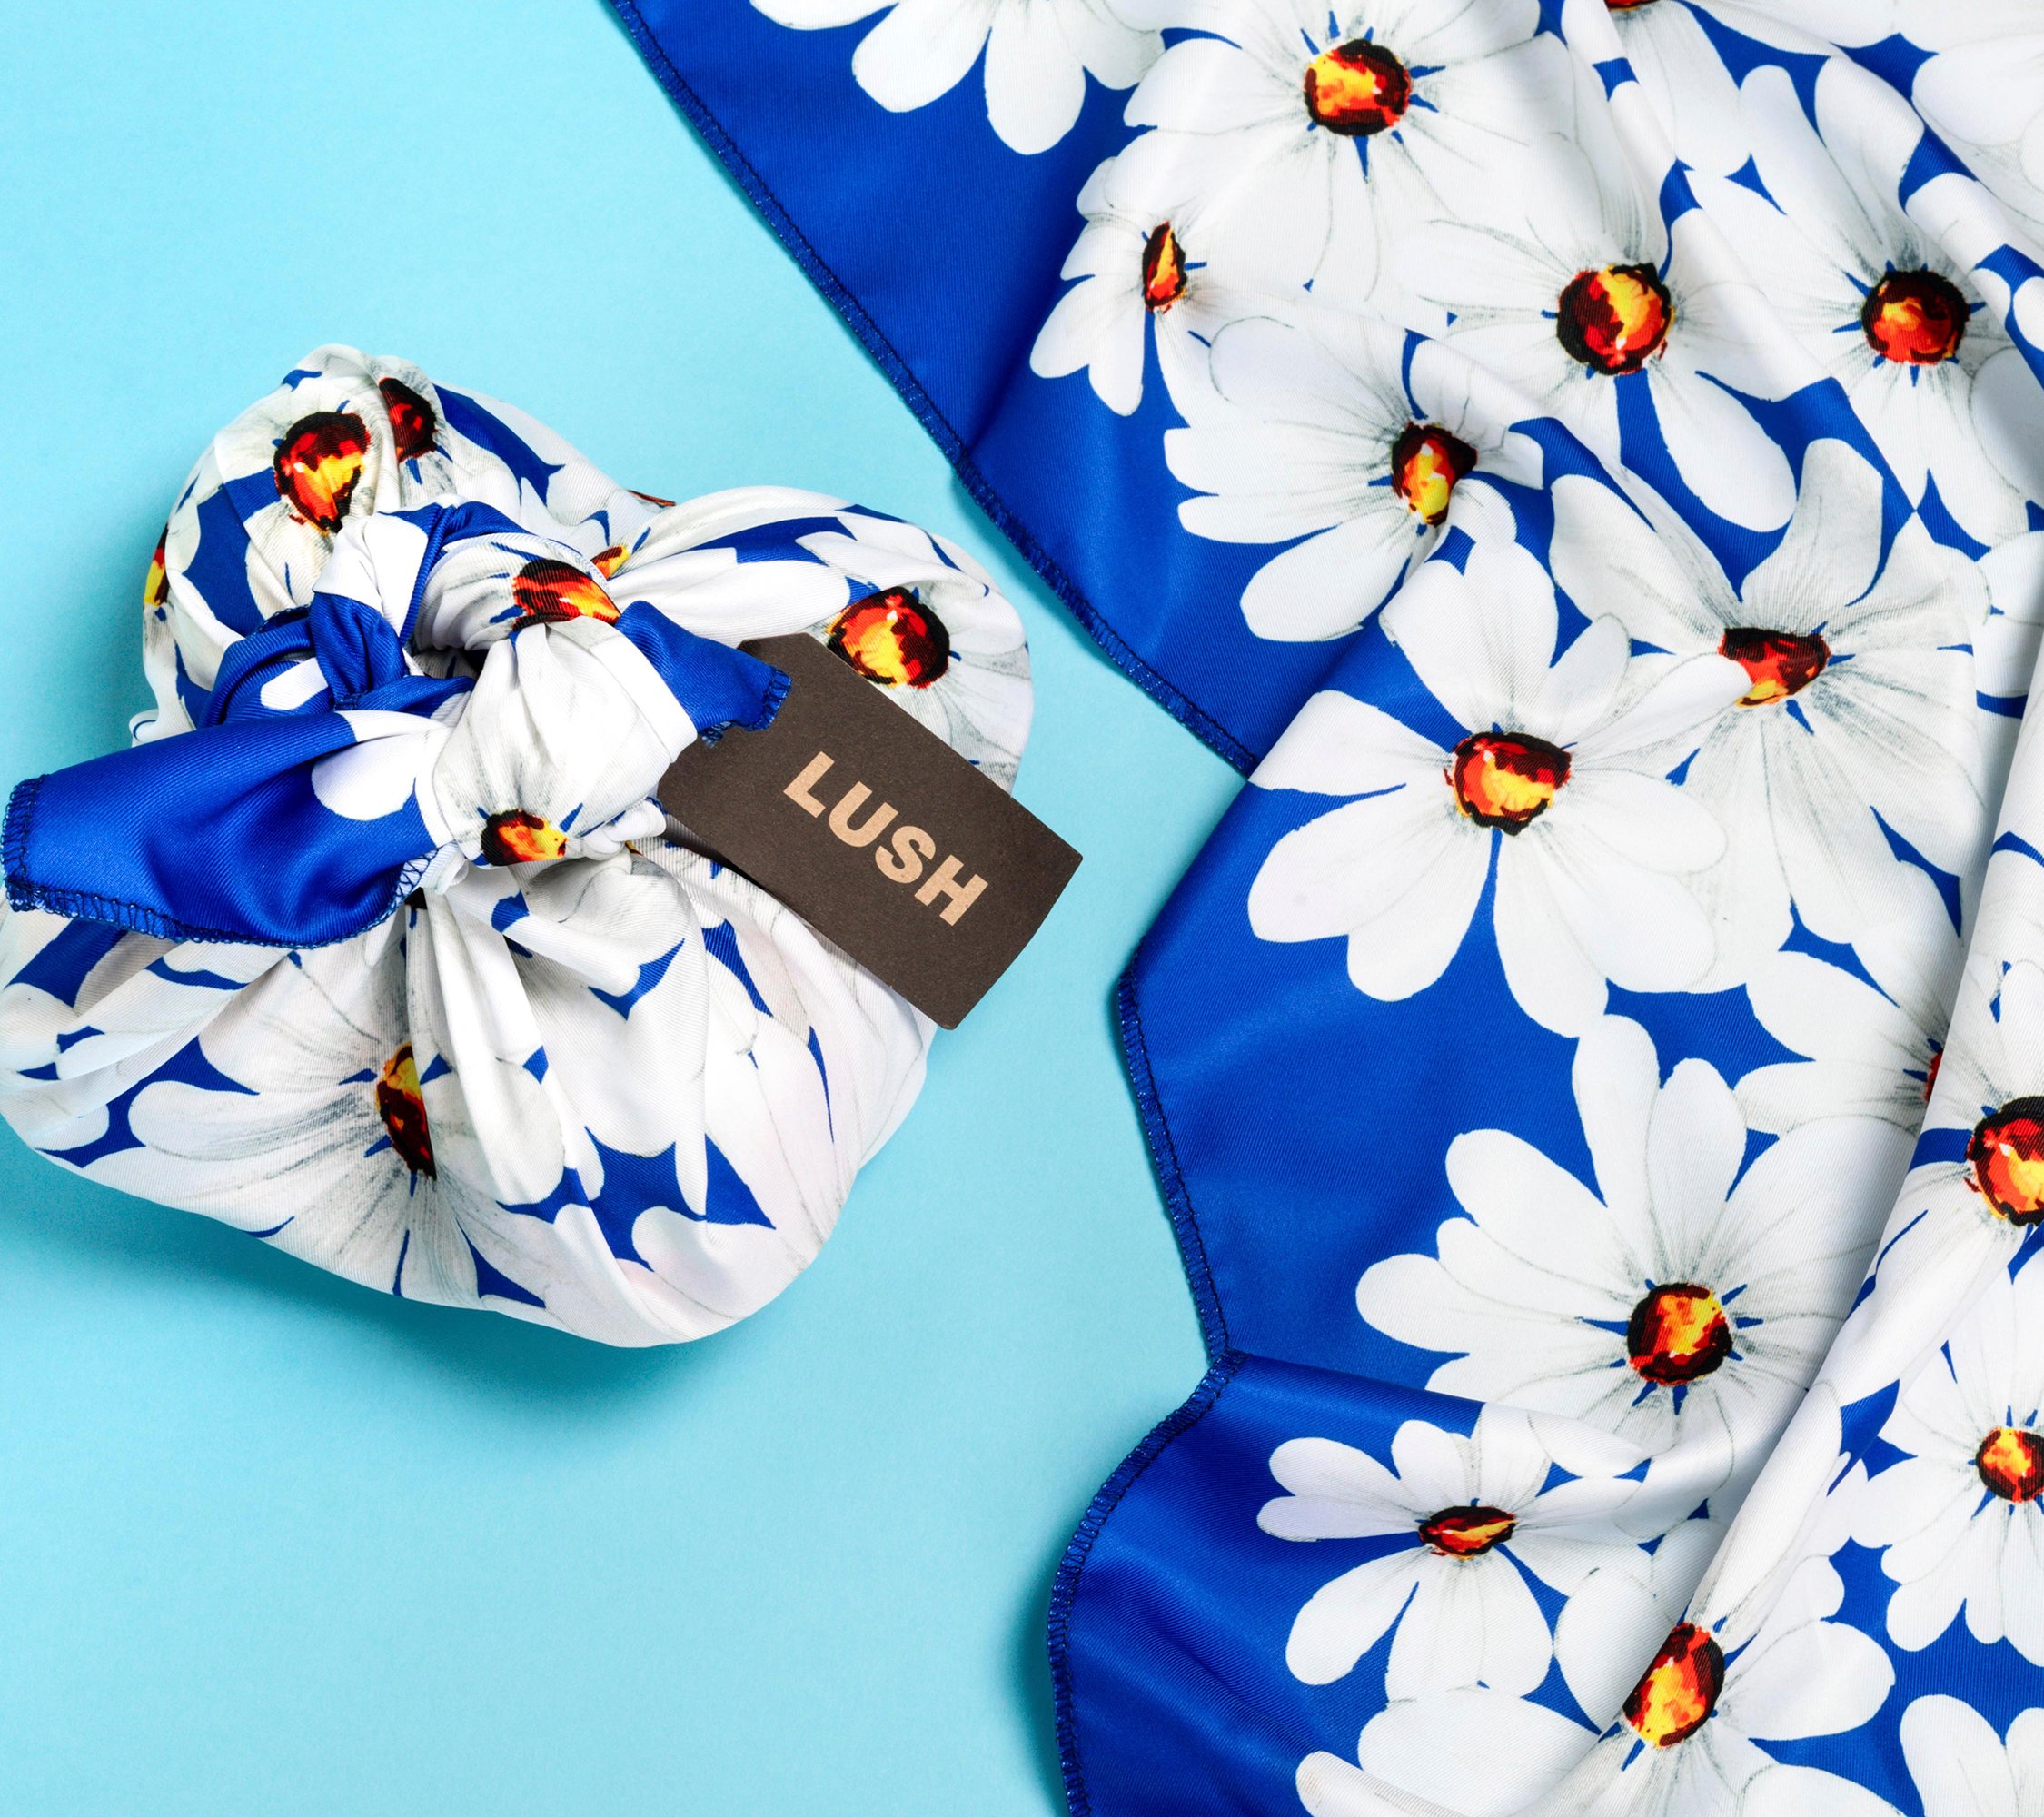 The knot wrap is wrapped and knotted around a 4 bath bombs, as well as laid out flat, on a bright blue background.